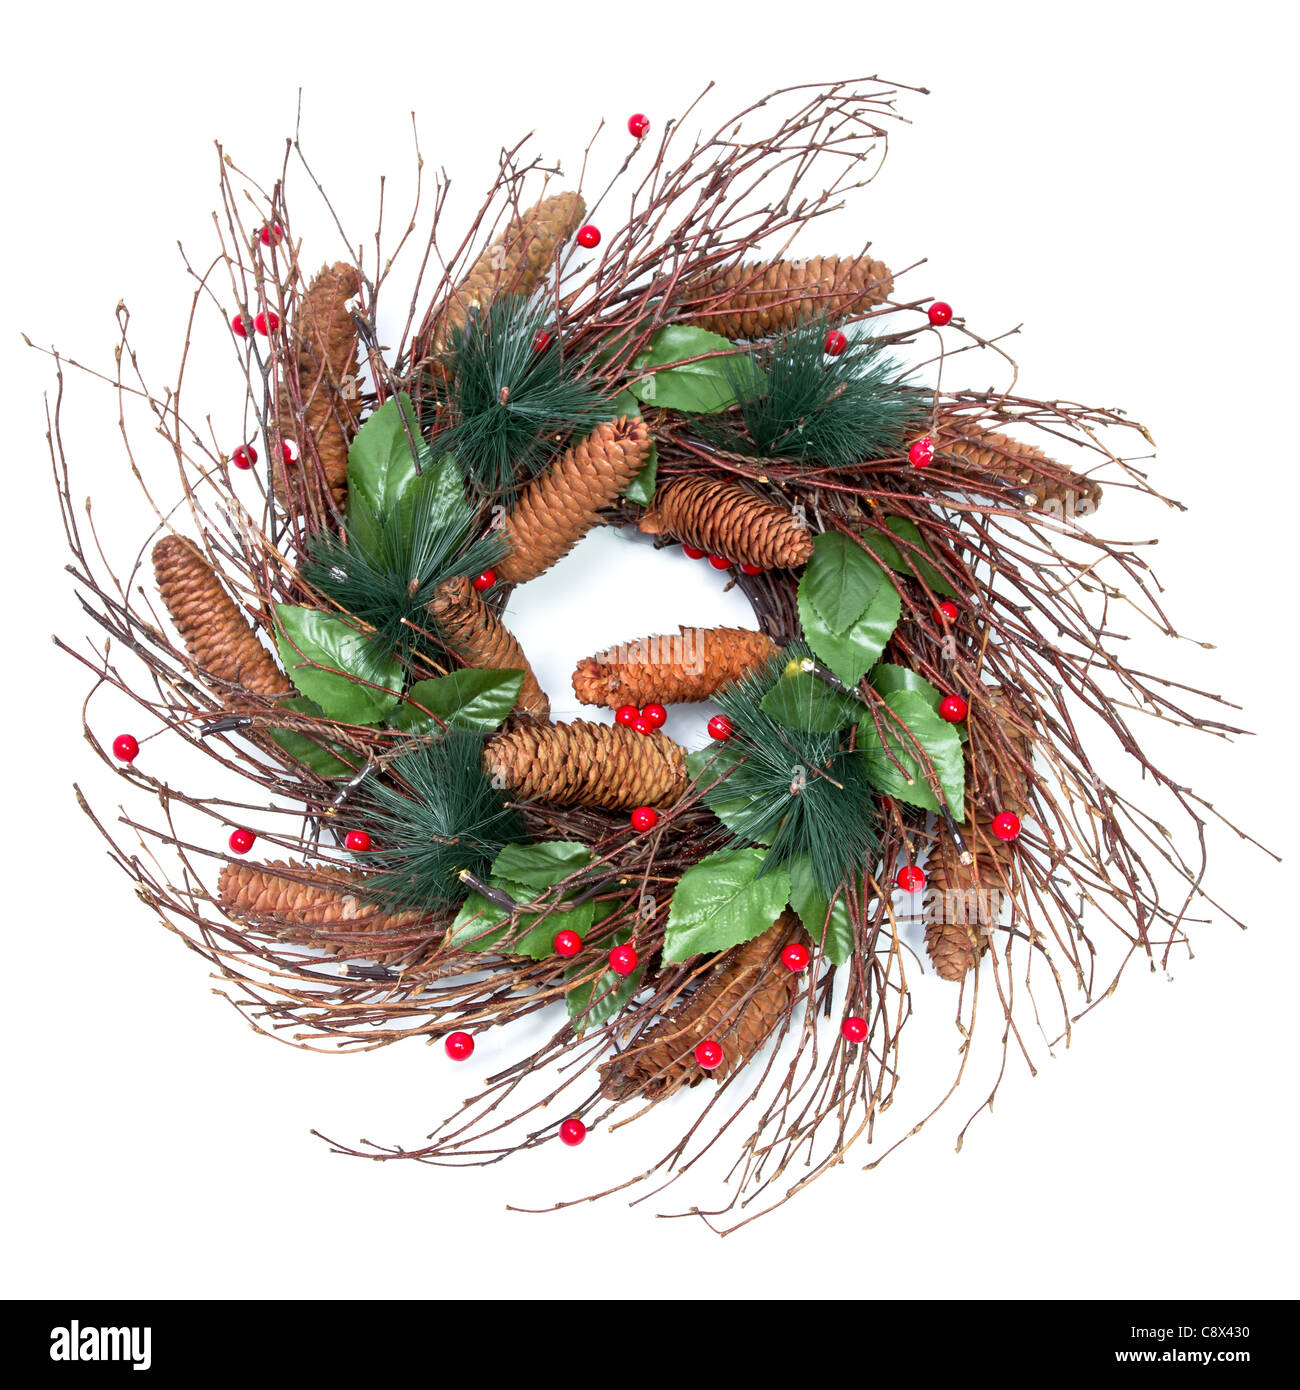 Christmas Wreath Pine Cones Holly Twigs Stock Photo